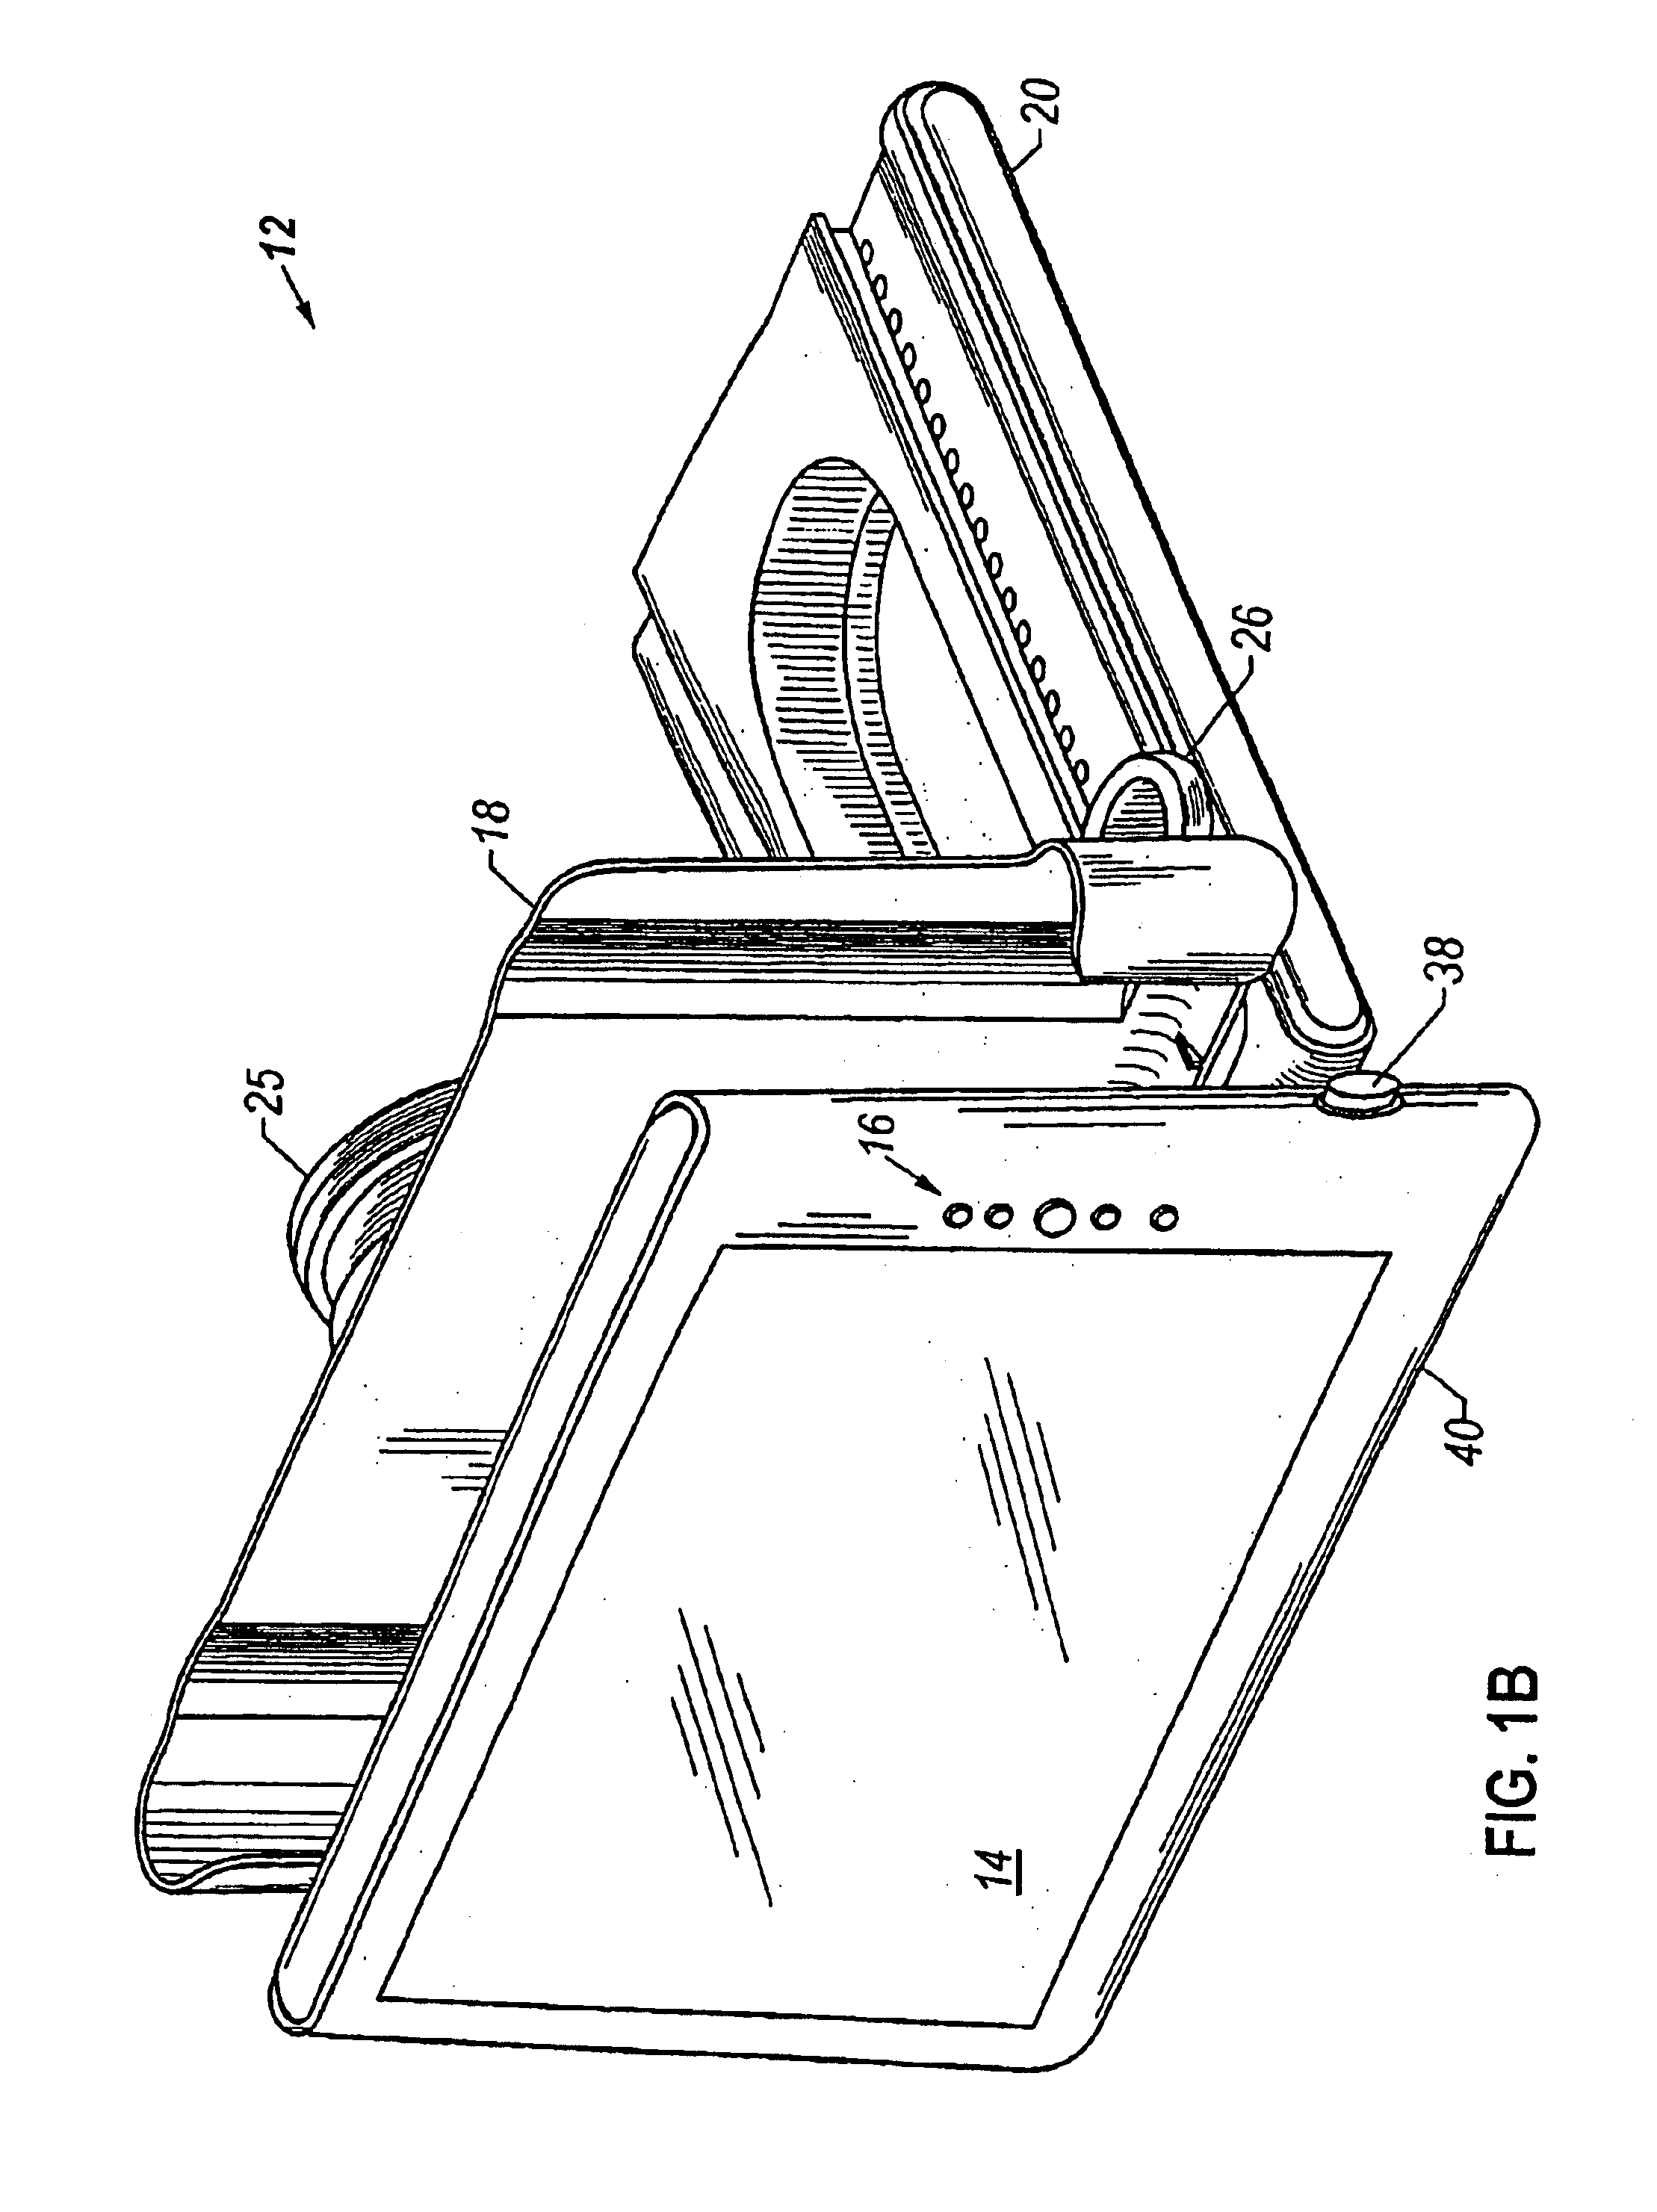 Flexible circuit board for tablet computing device